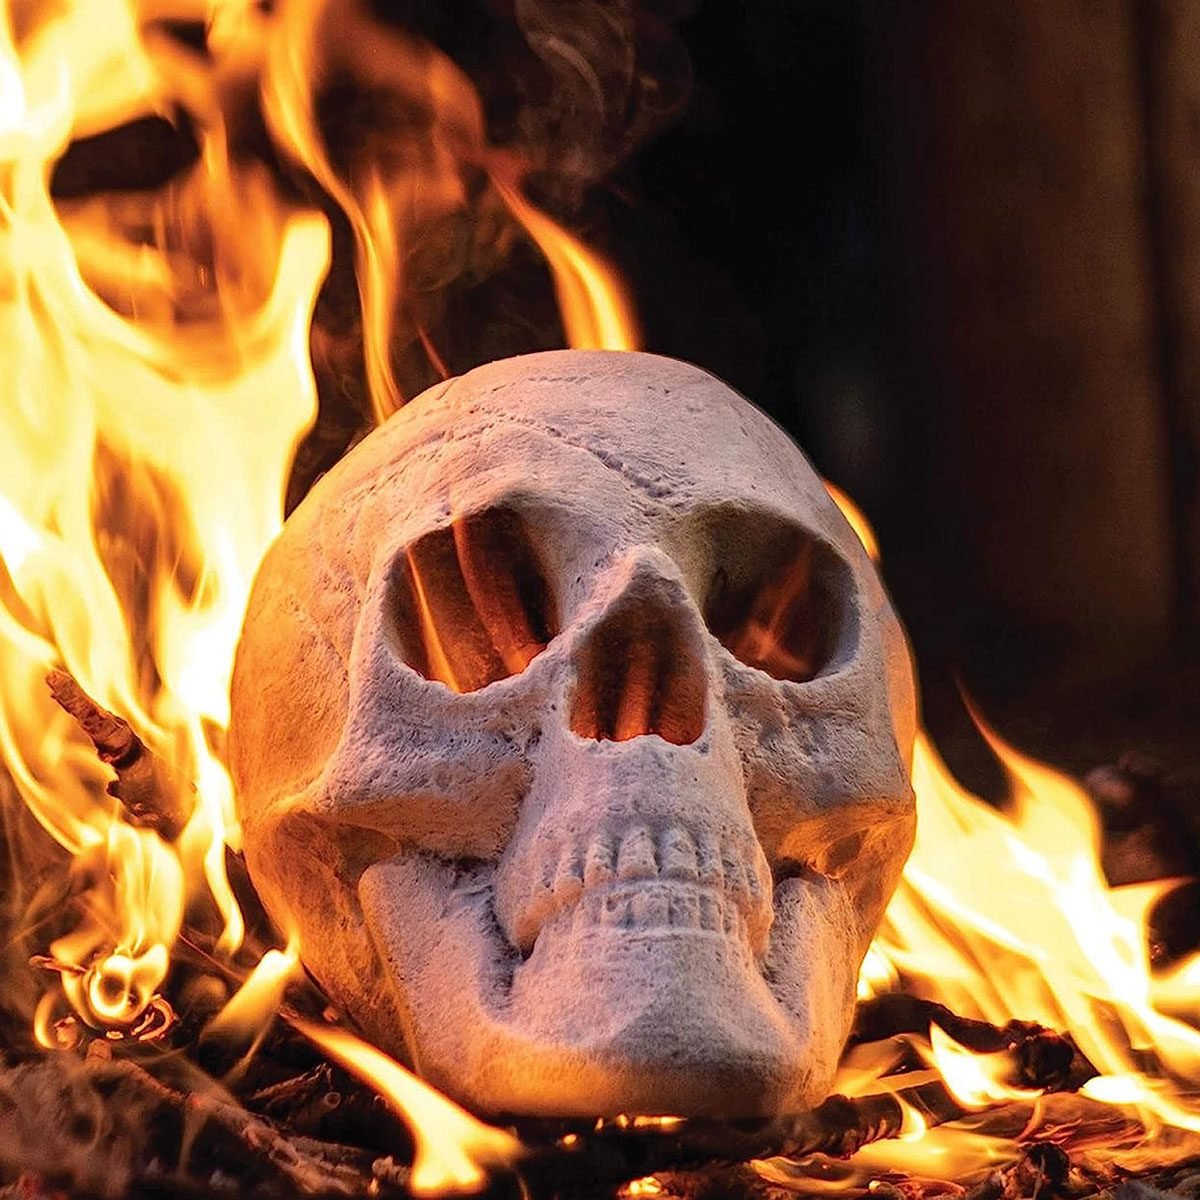 If You're Hosting a Halloween Party, You Need This Fire Pit Skull ASAP